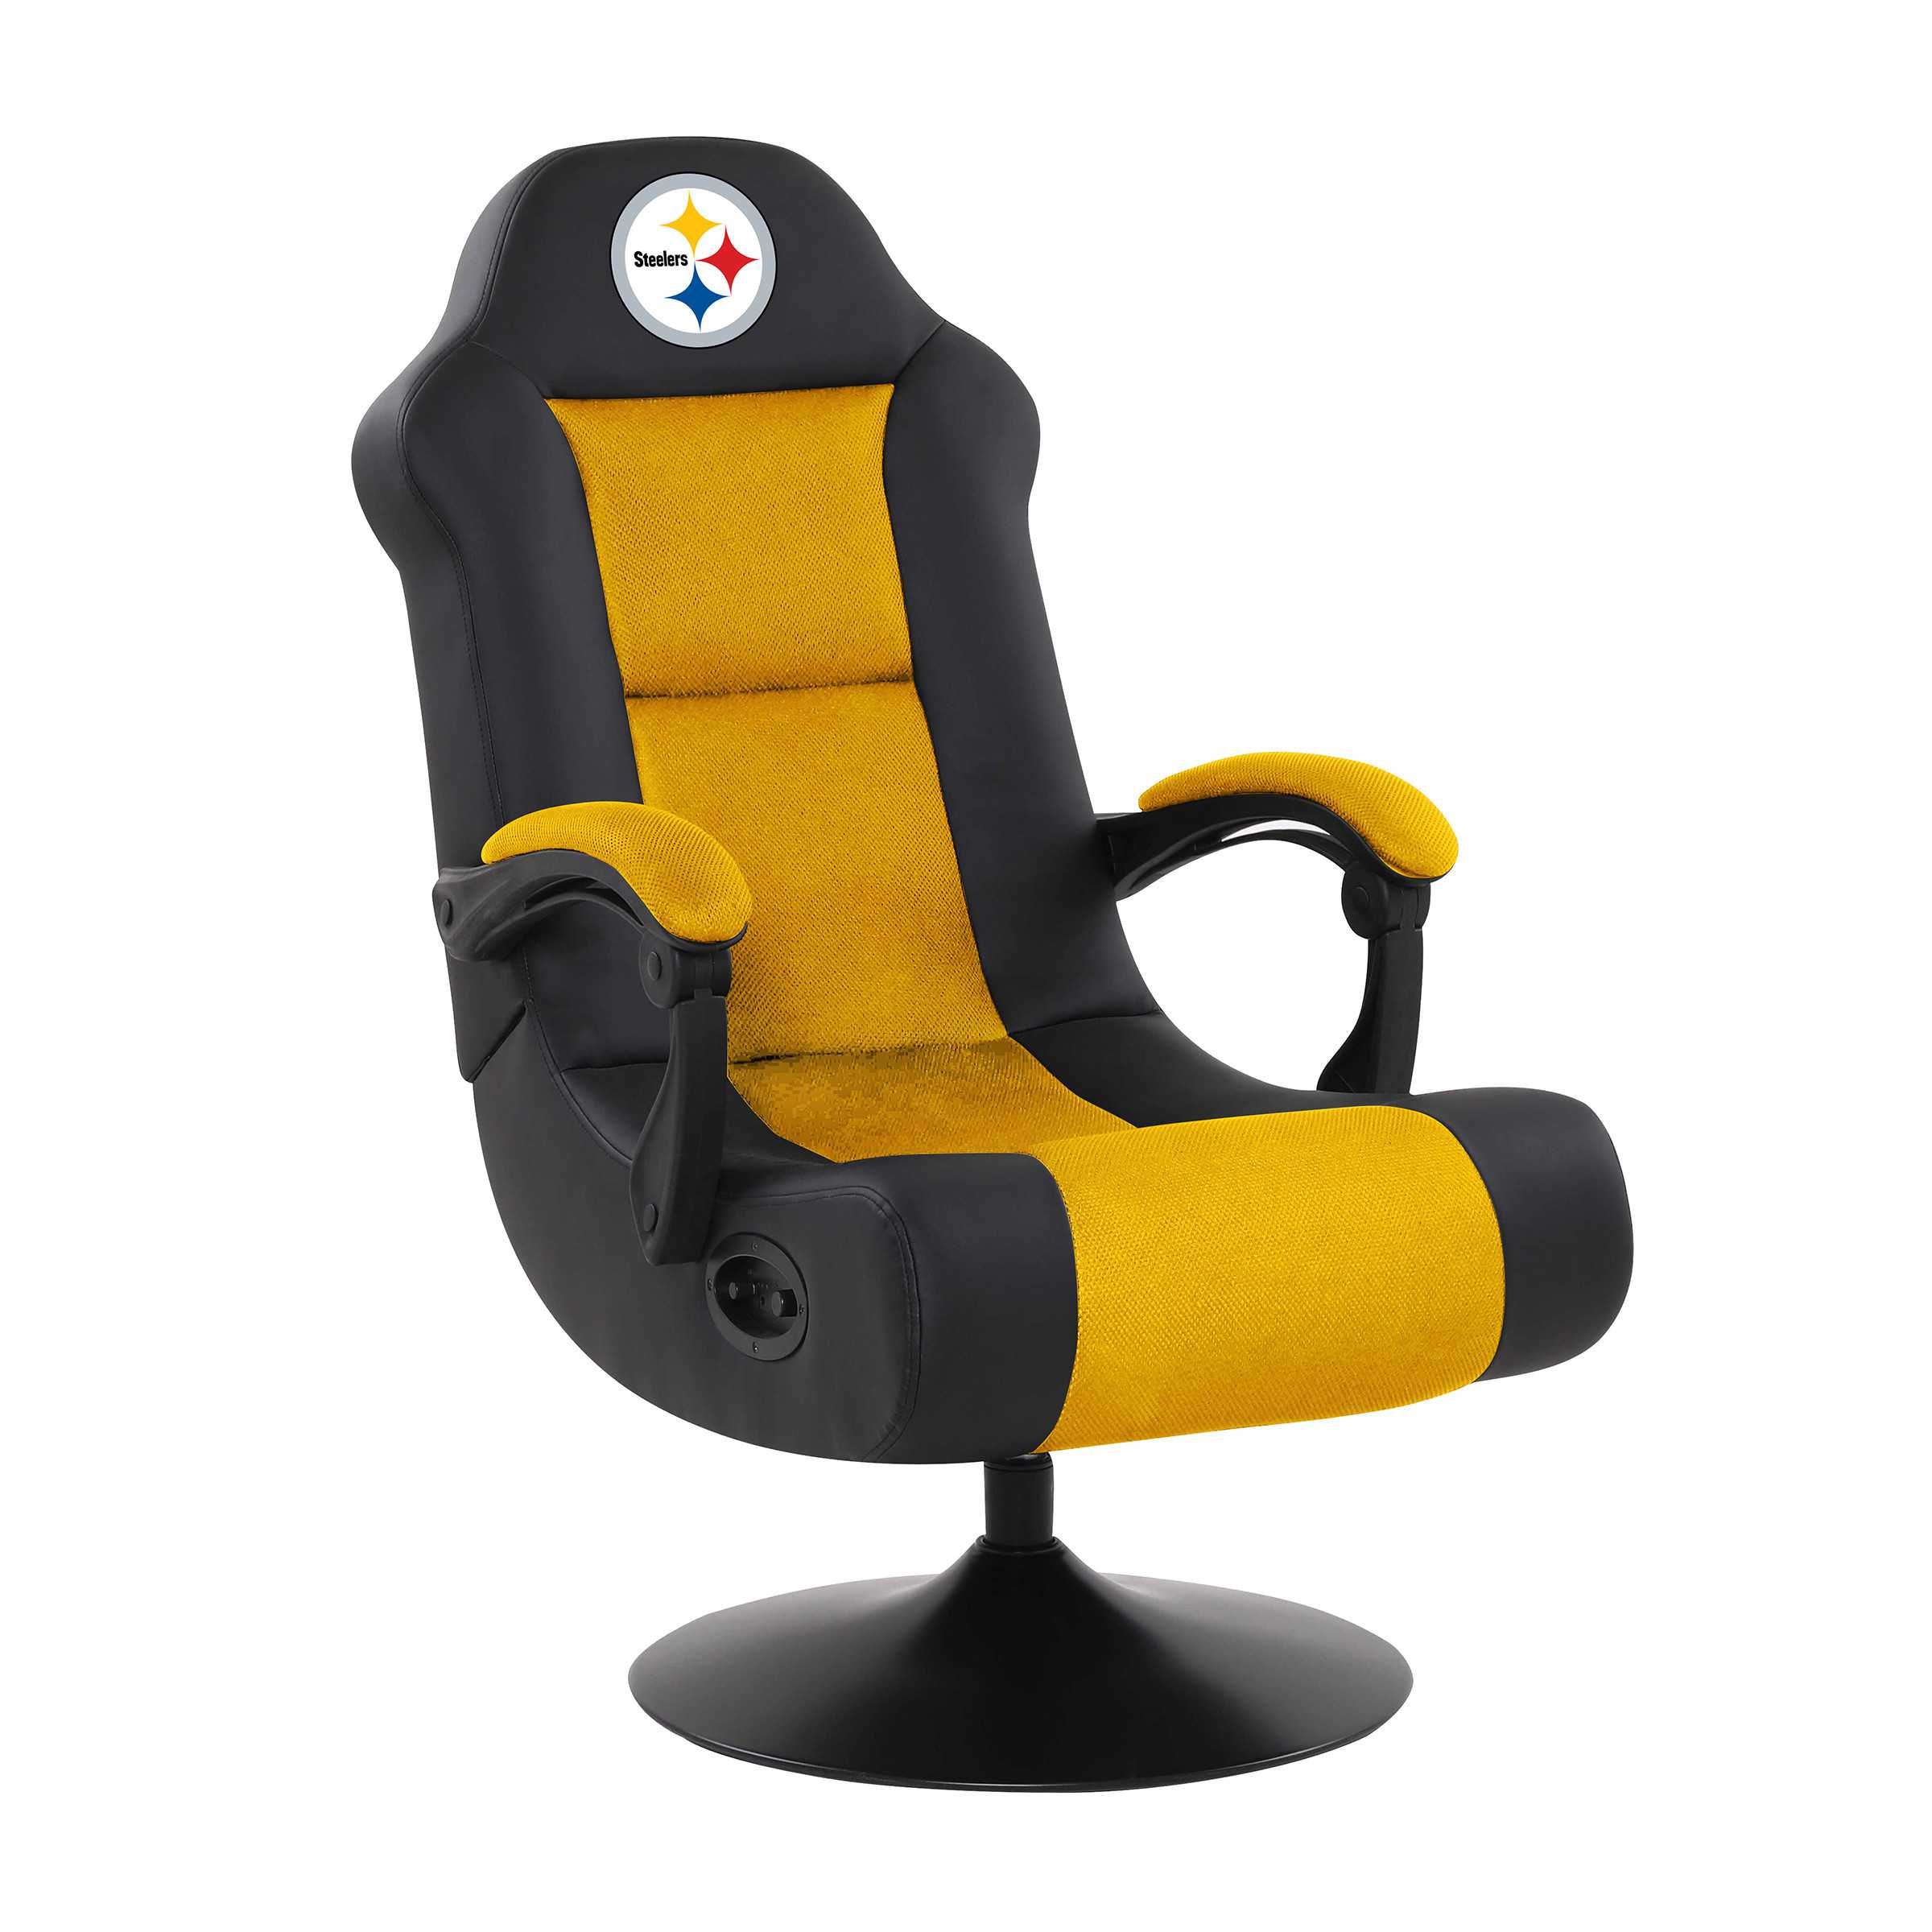 ULTRA GAME CHAIR PITTSBURGH STEELERS